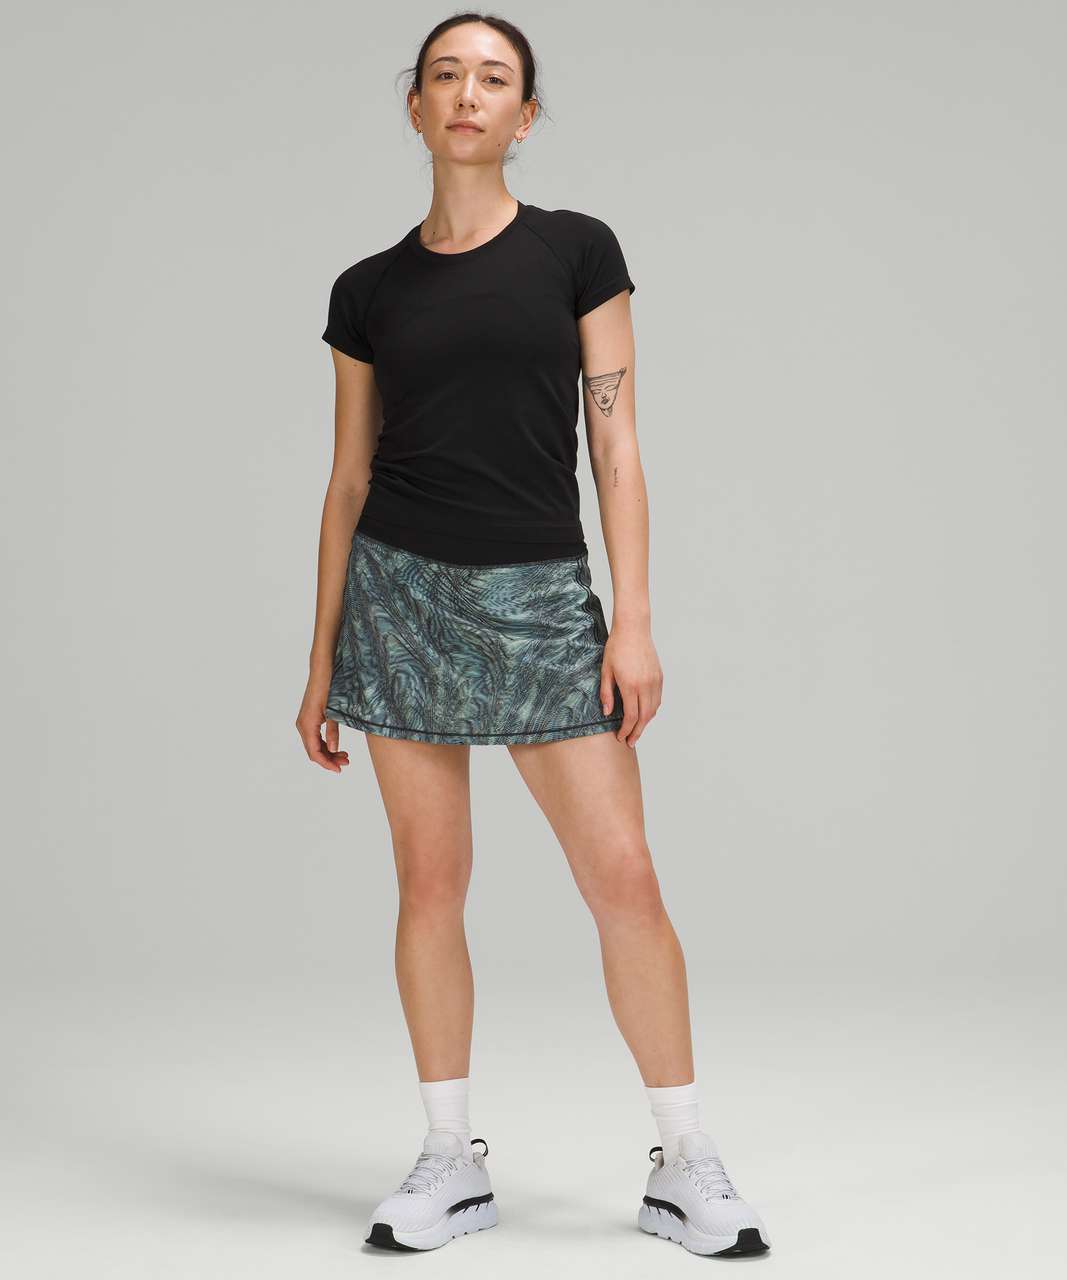 Lululemon Pace Rival Skirt (Tall) *No Panels 15" - Dimensional Icing Blue Multi / Black